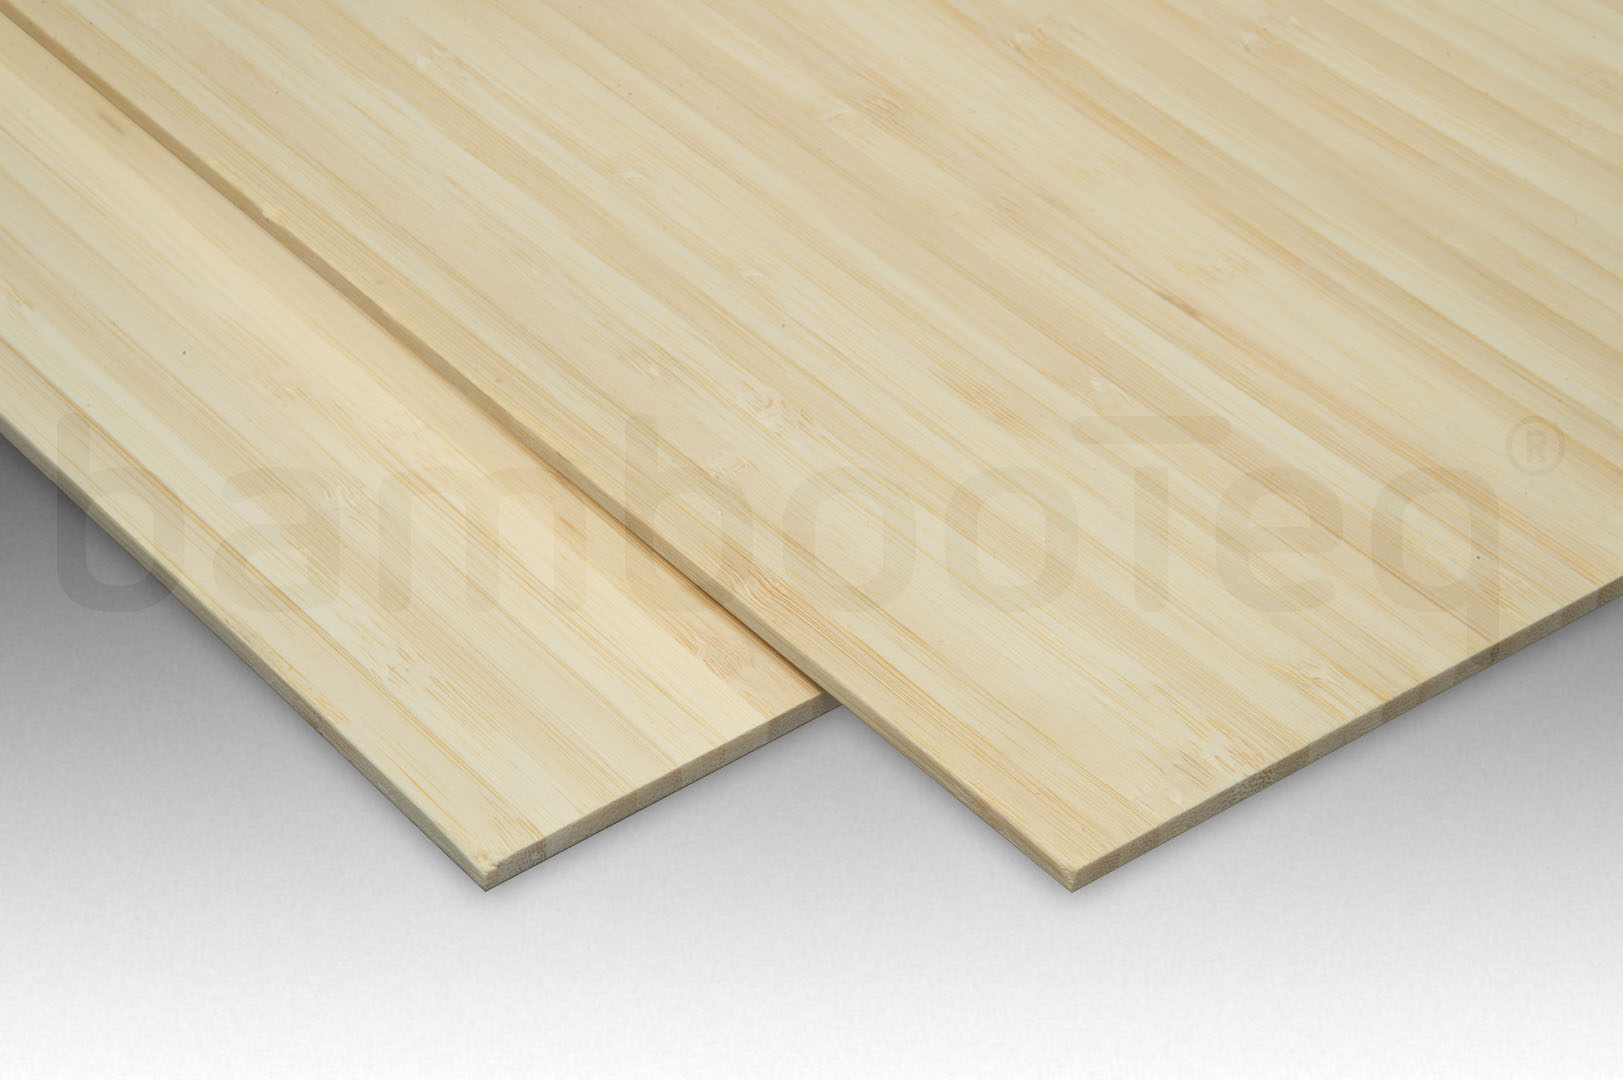 Bamboe plaat 5 mm side-pressed 1 laags naturel 244 x 122 cm